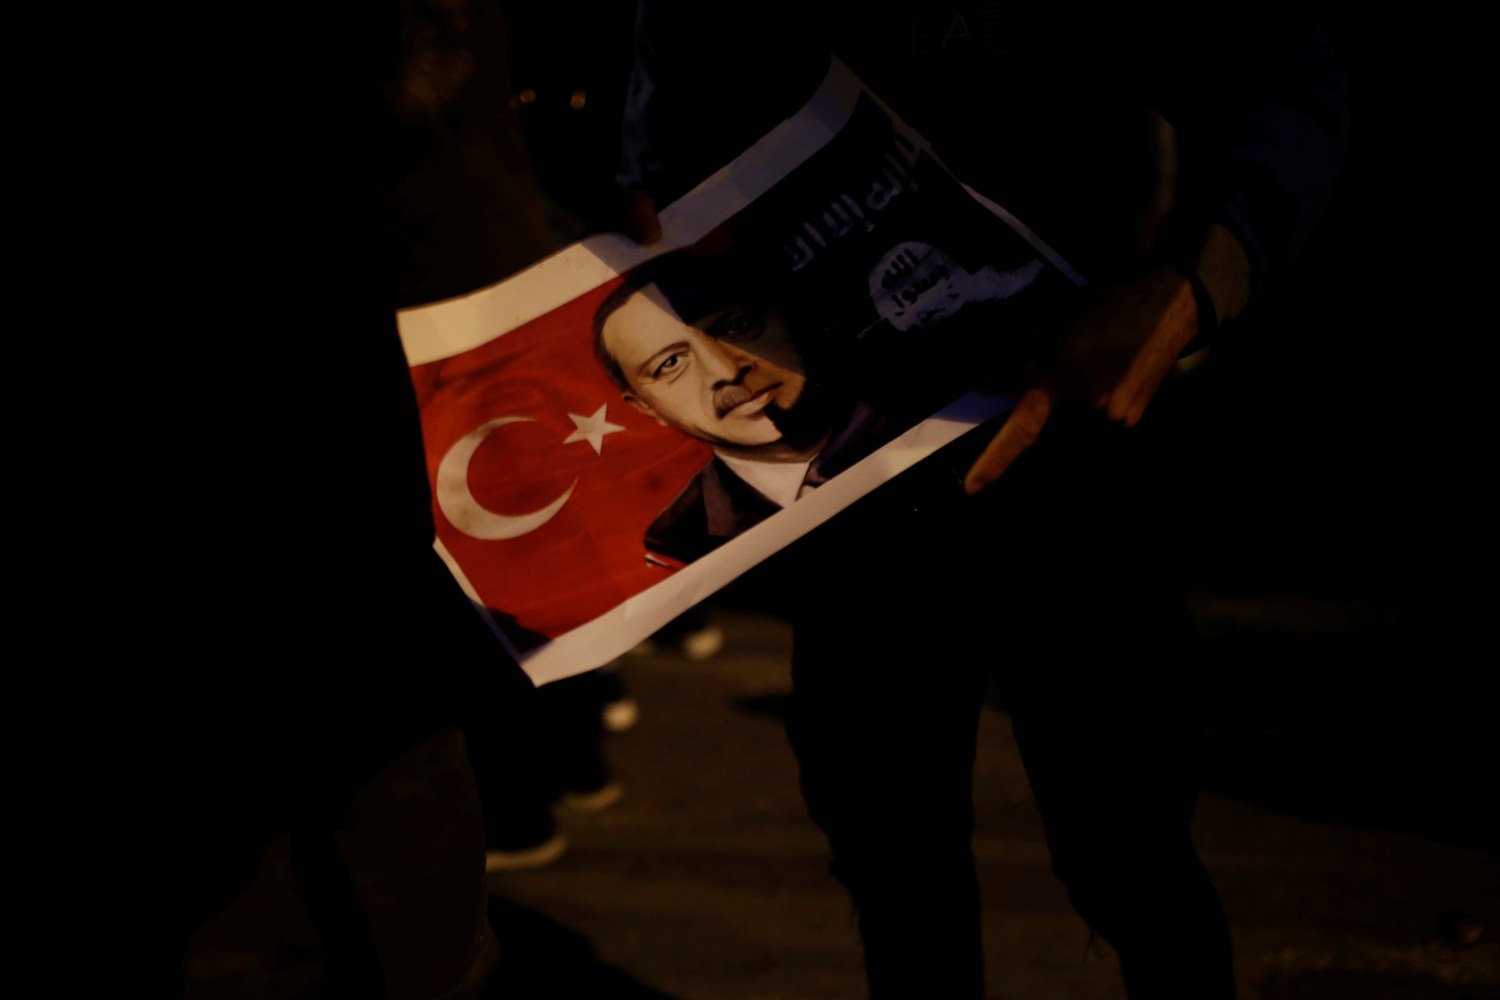 A Kurd living in Greece holds a poster depicting Turkish President Recep Tayyip Erdogan during a demonstration against the Turkish offensive on Kurdish forces in northwest Syria, in Athens, Greece, January 23, 2018. REUTERS/Alkis Konstantinidis - RC16FB9E79B0